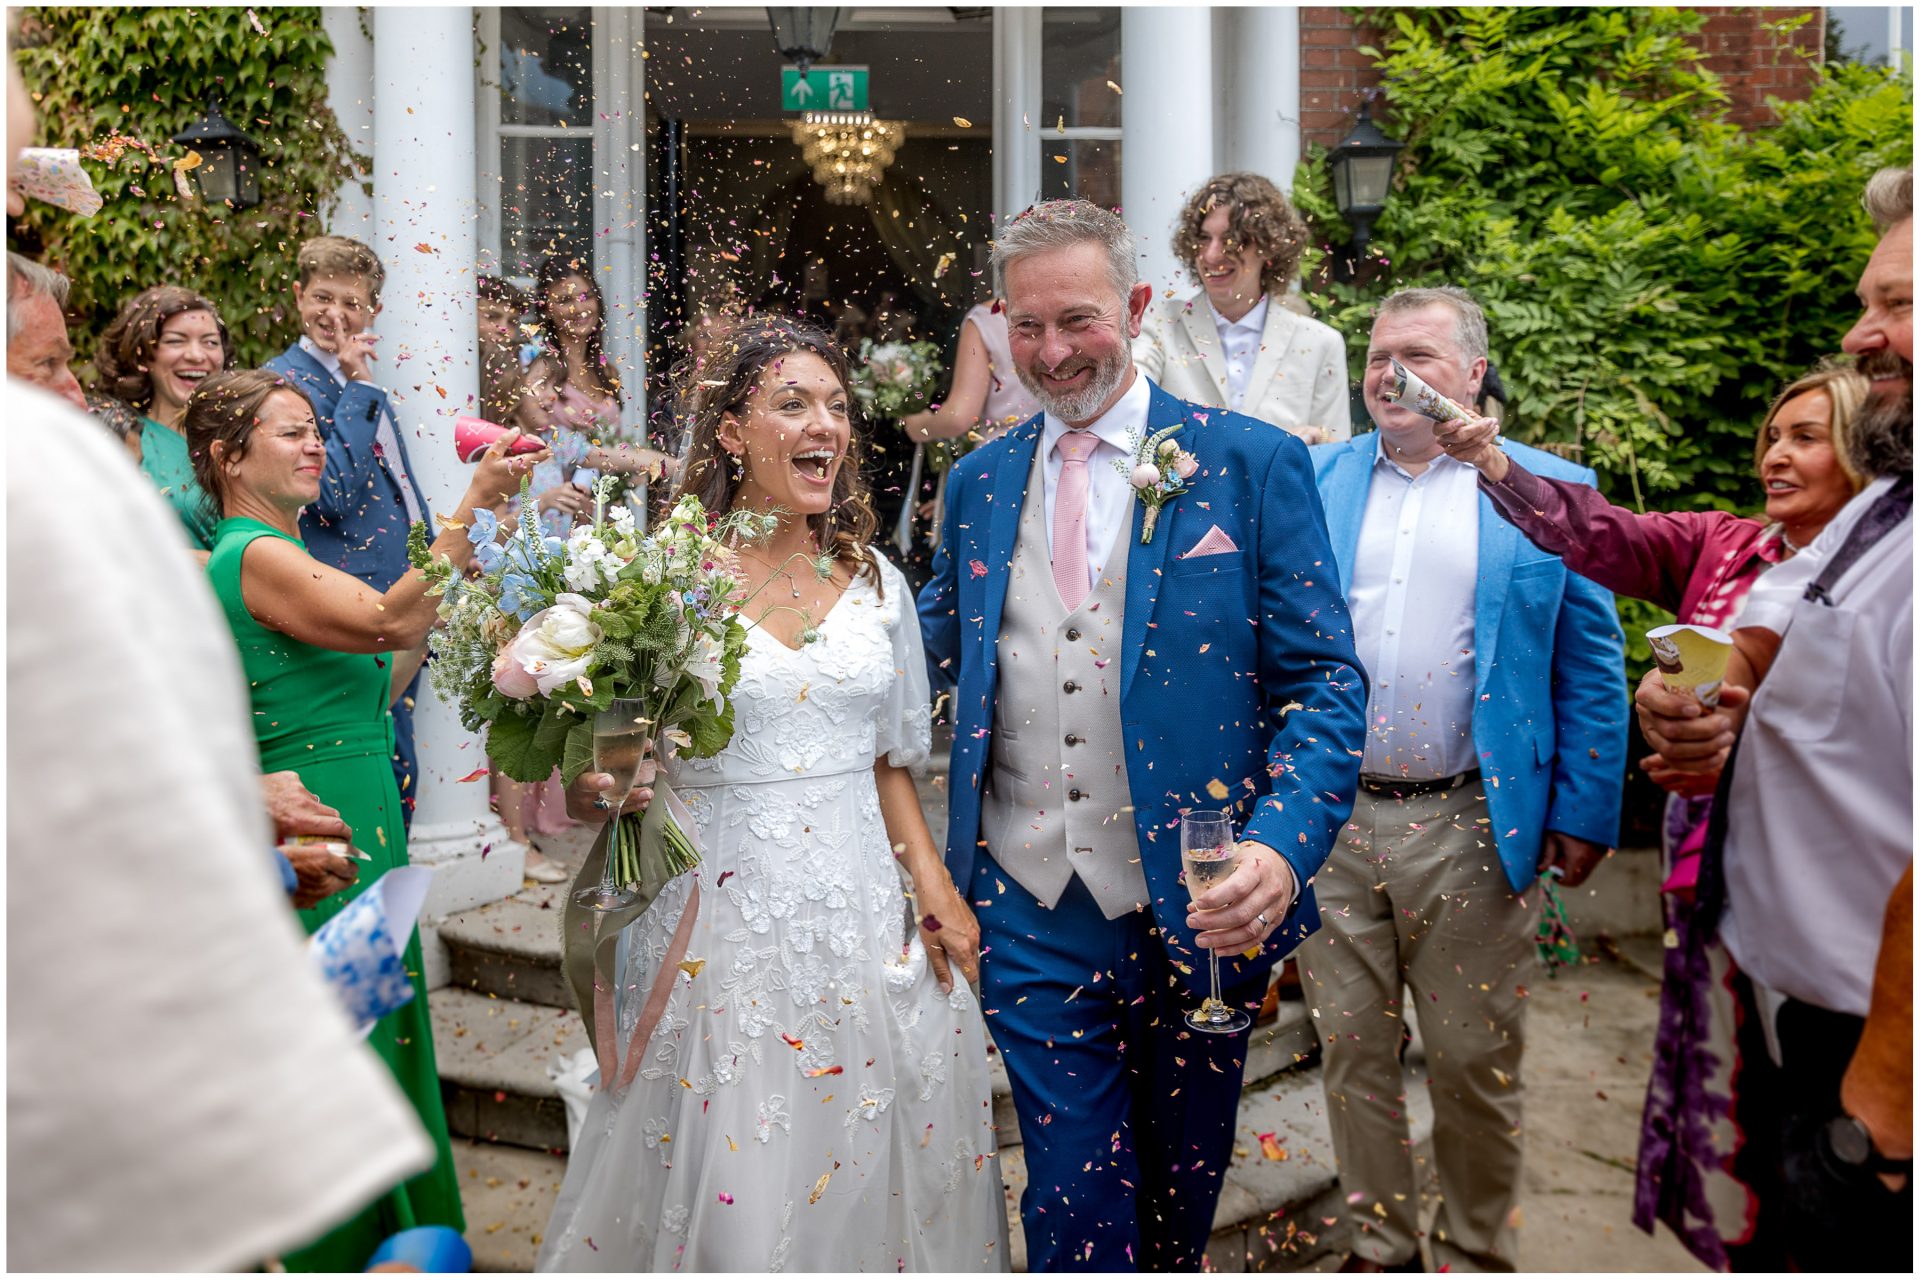 Guests shower the couple in confetti as they exit the Hotel du Vin Poole wedding venue by the impressive front entrance